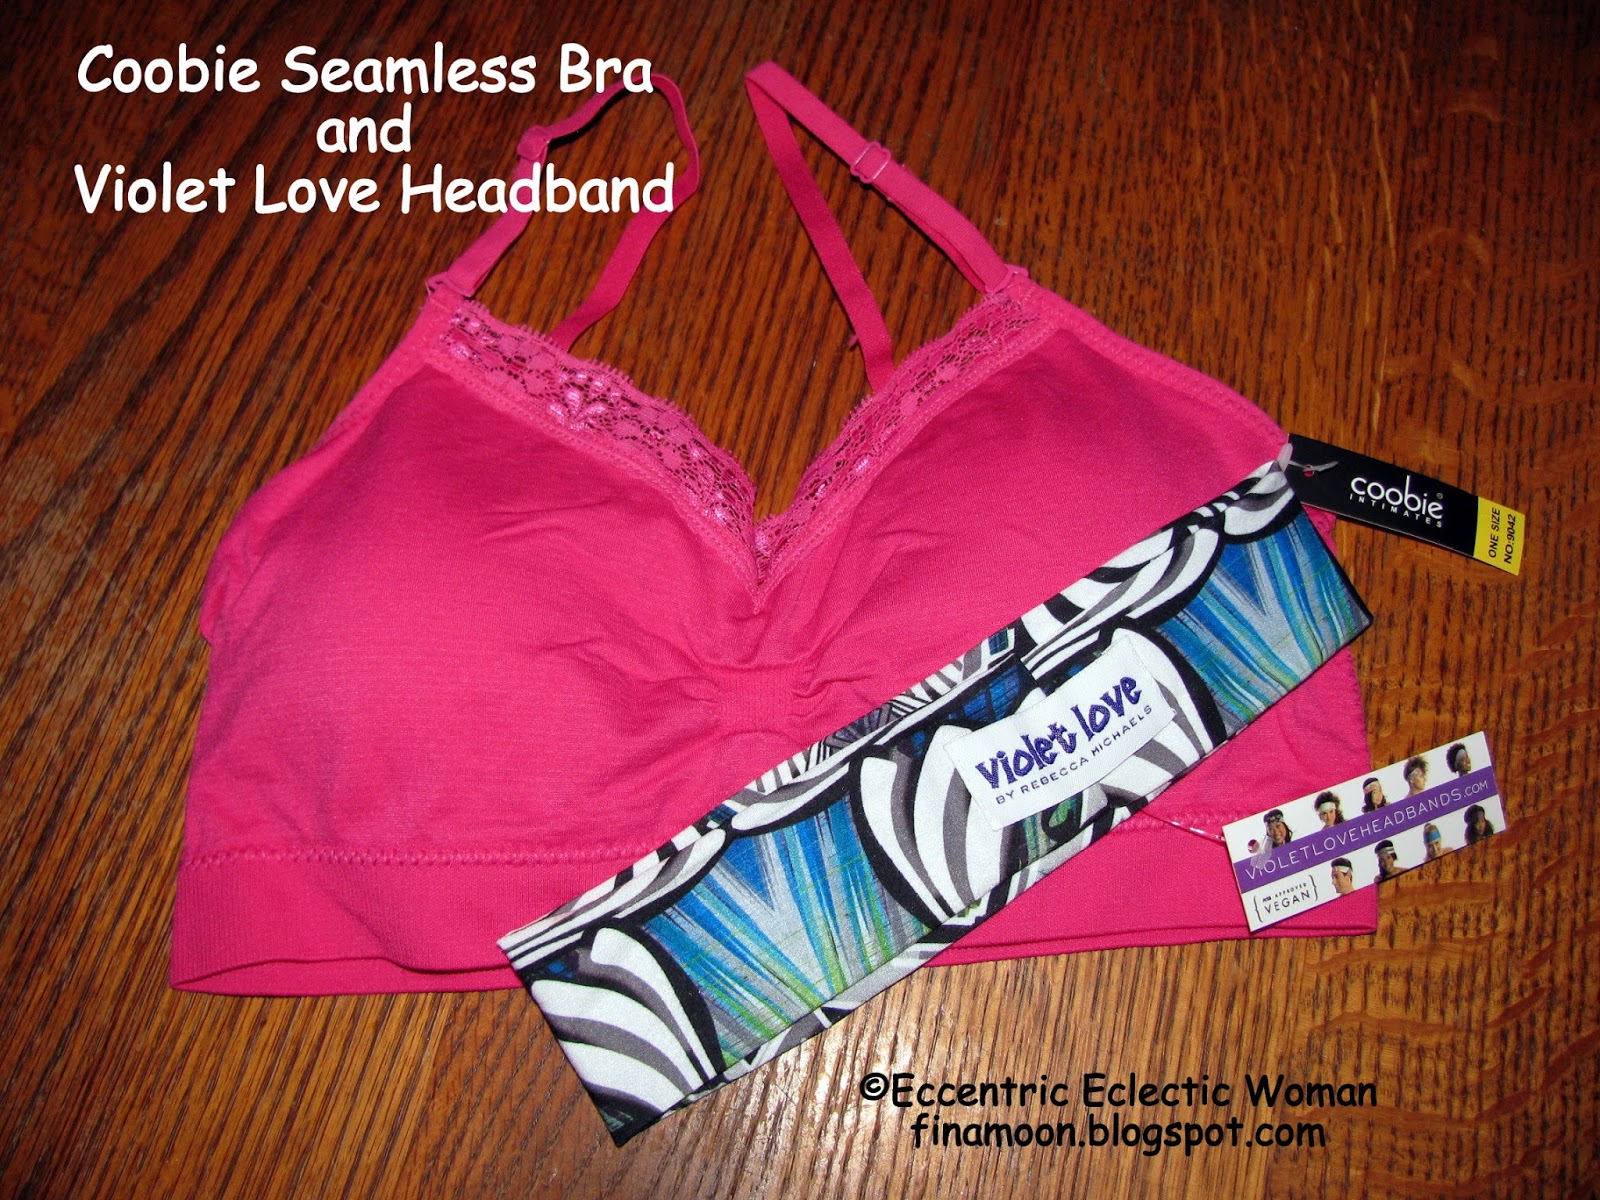 Eccentric Eclectic Woman: Coobie Seamless Bra and Violet Love